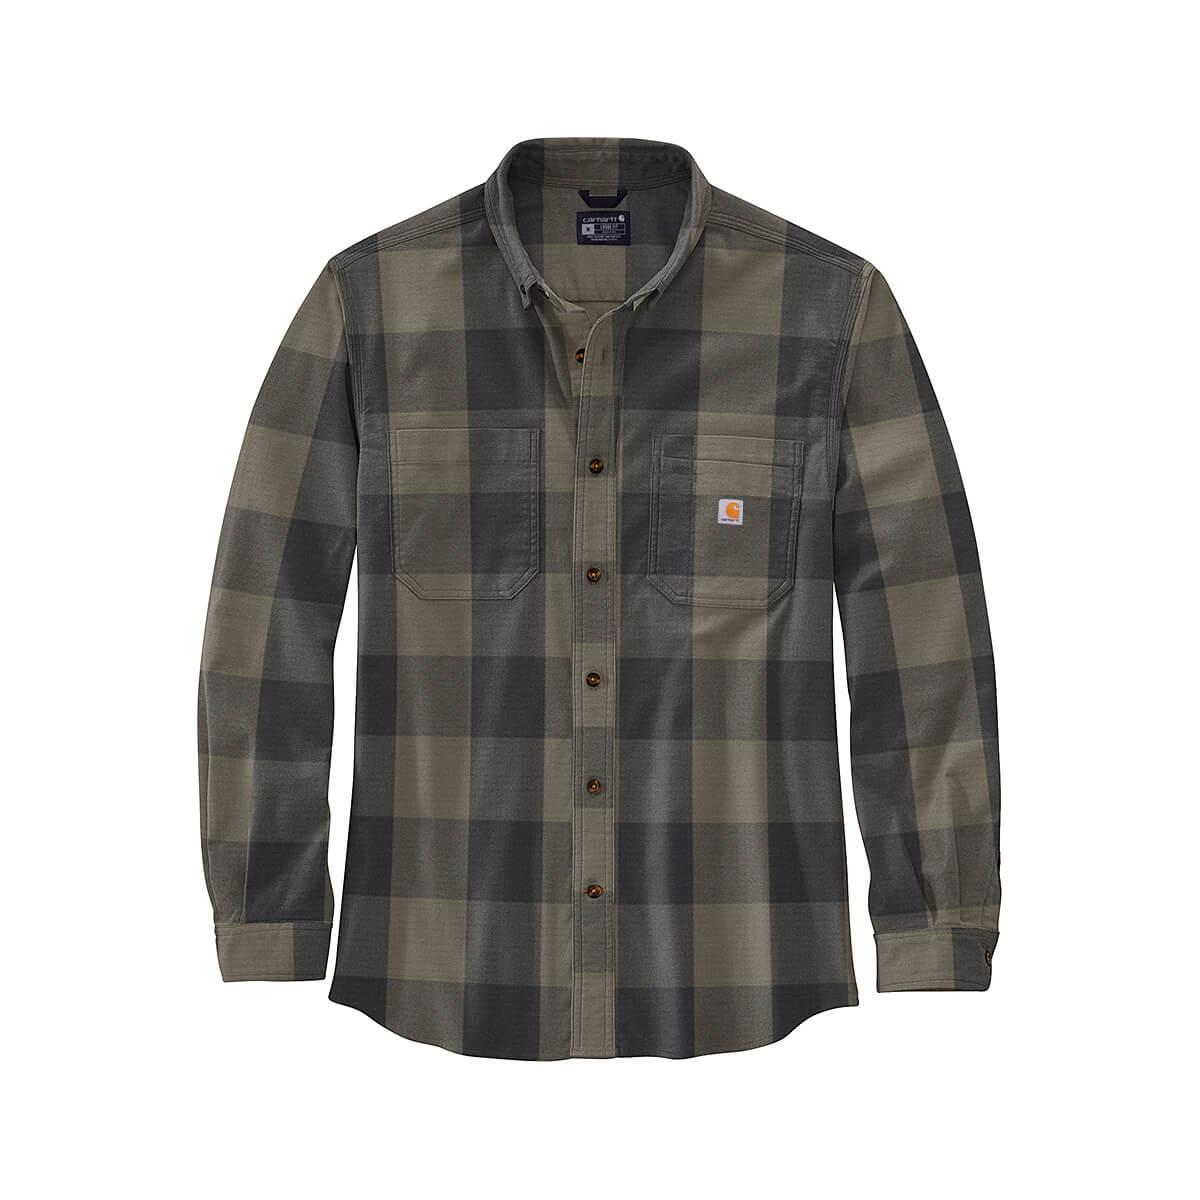  Men's Rugged Flex Relaxed Fit Midweight Flannel Long Sleeve Plaid Shirt